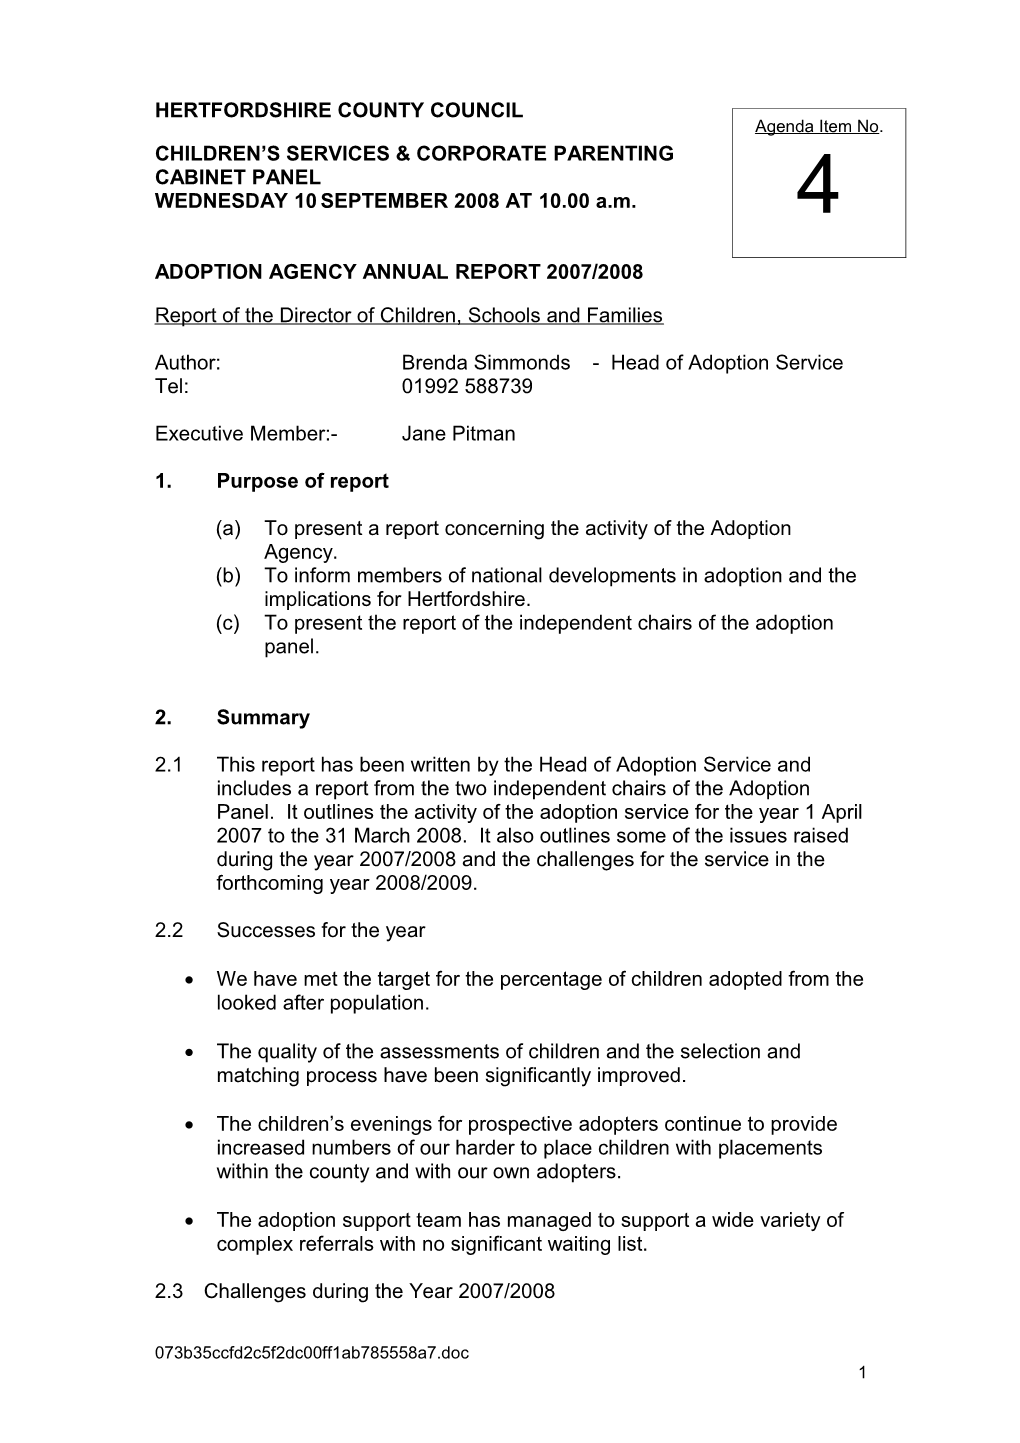 Adoption Agency Annual Report 2007/2008